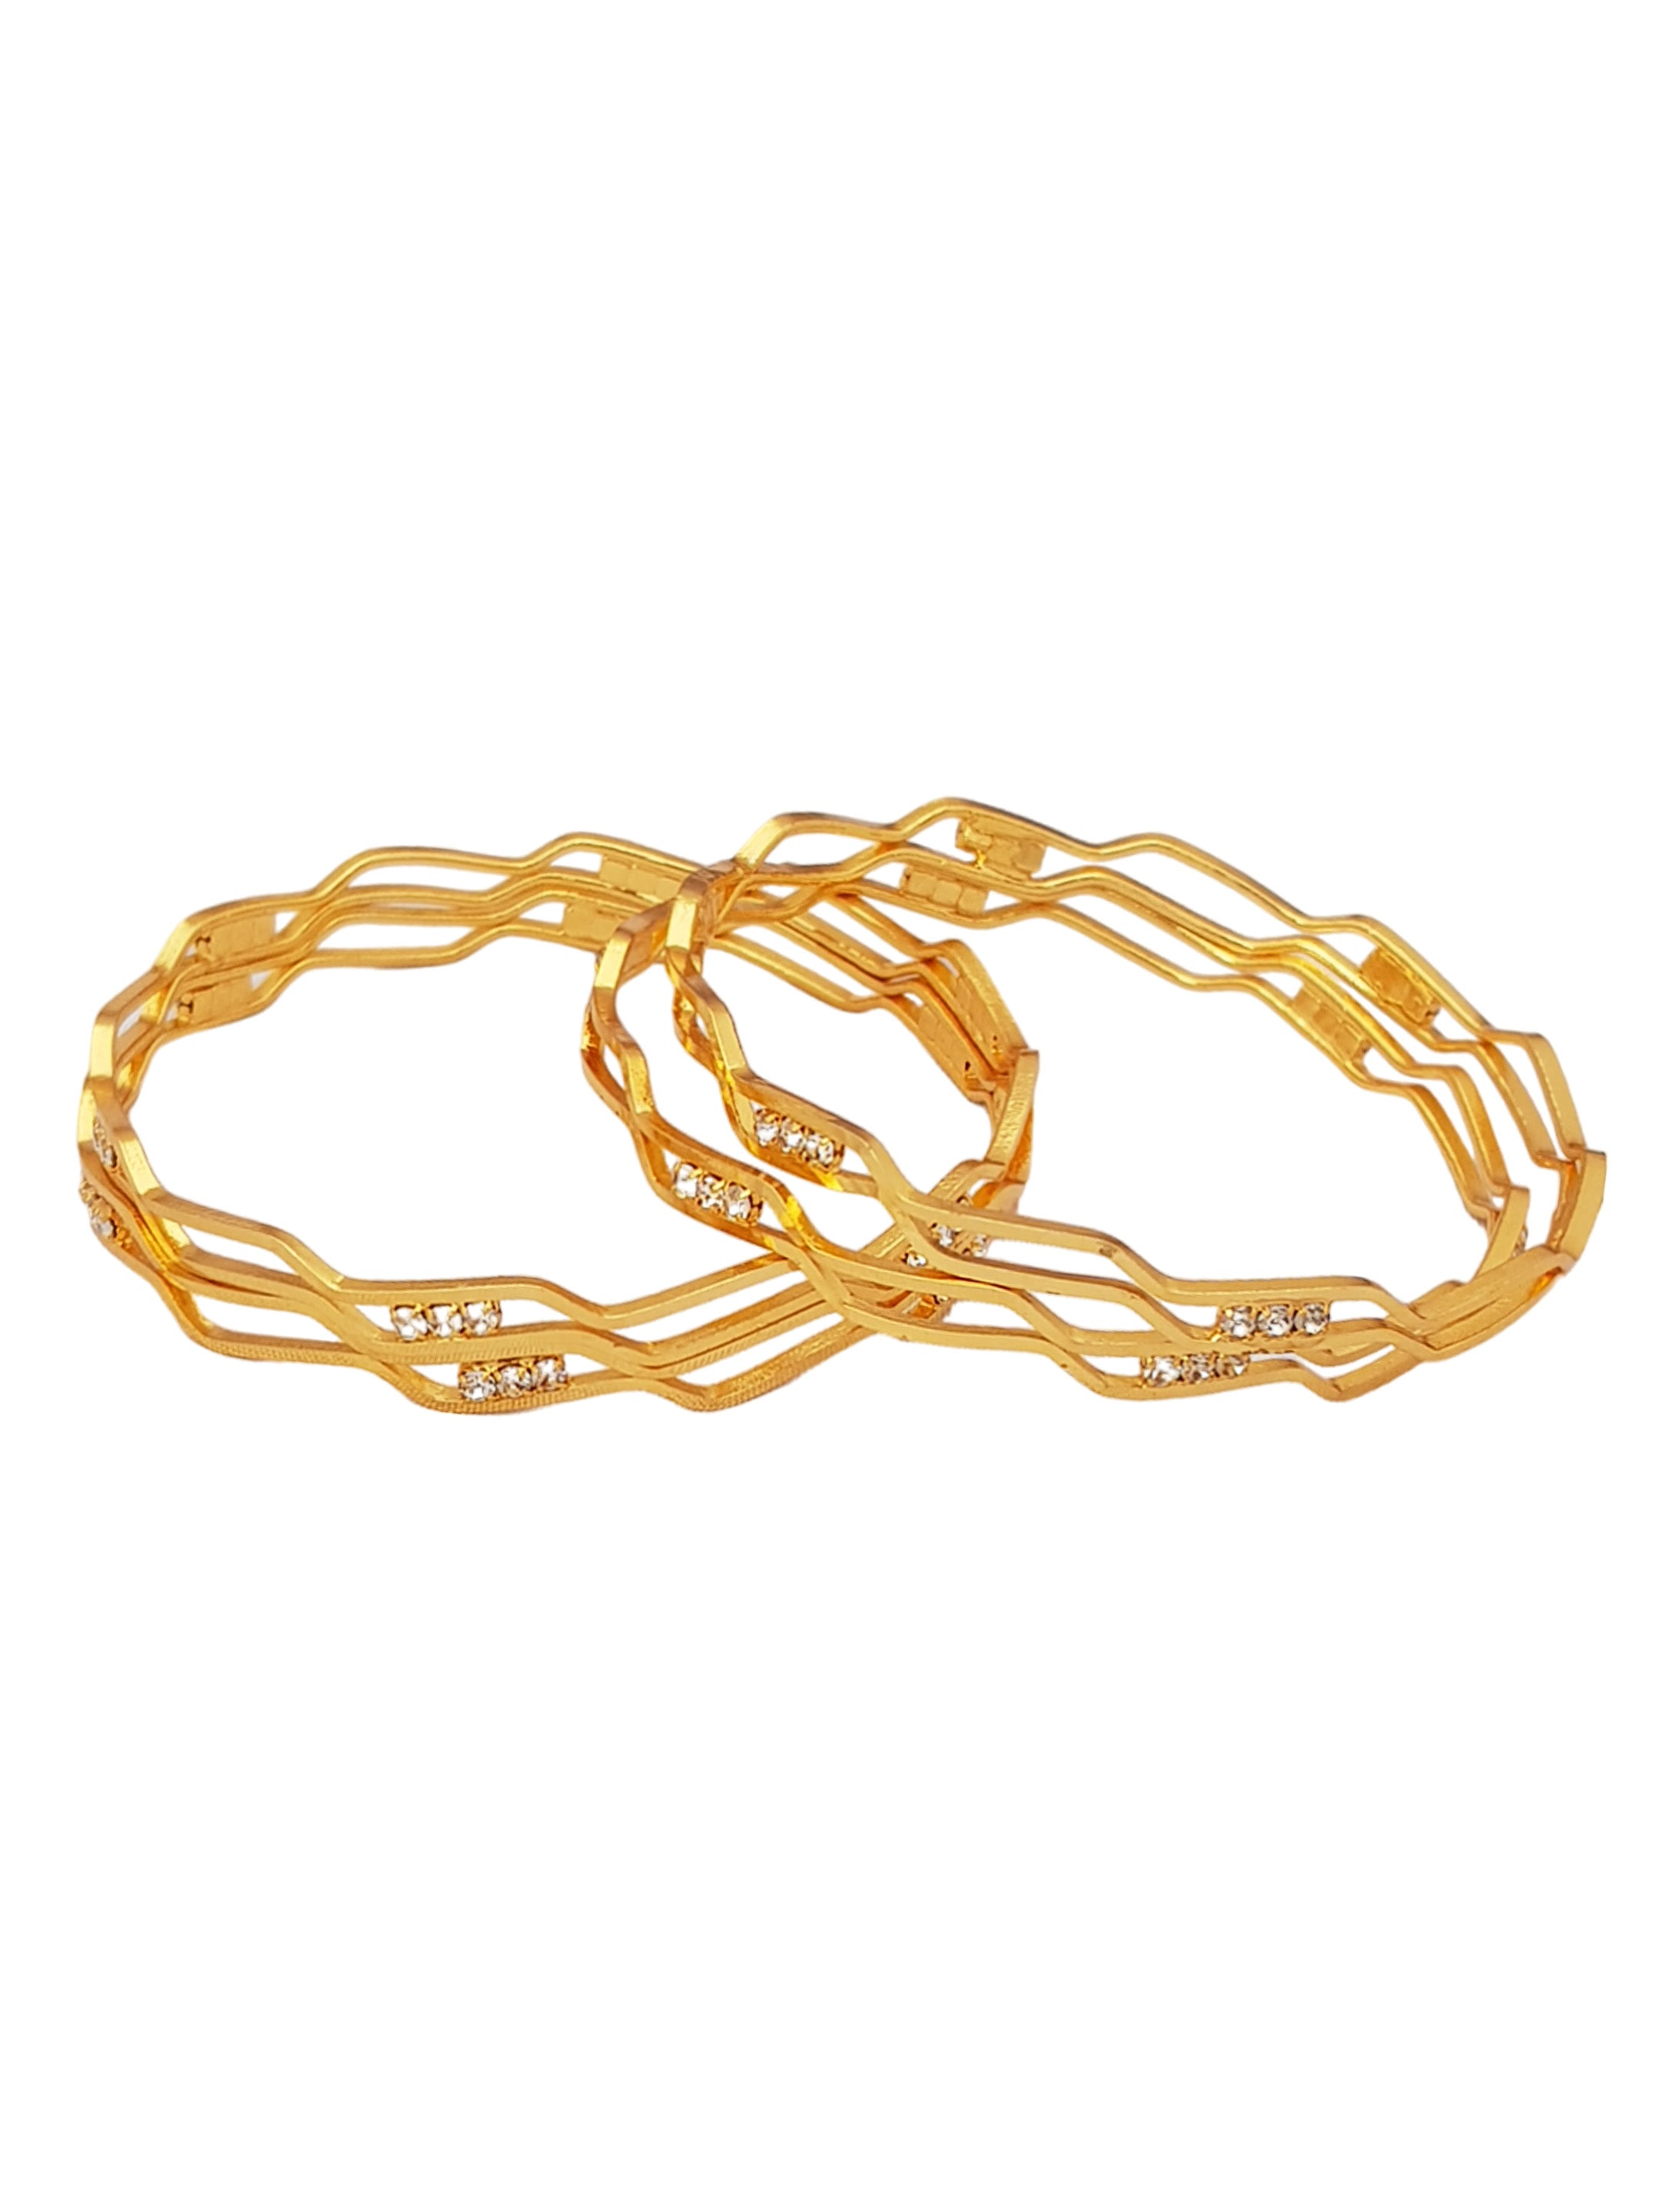 1 gm Microgold plating Zercon set of 4 bangles 18863A